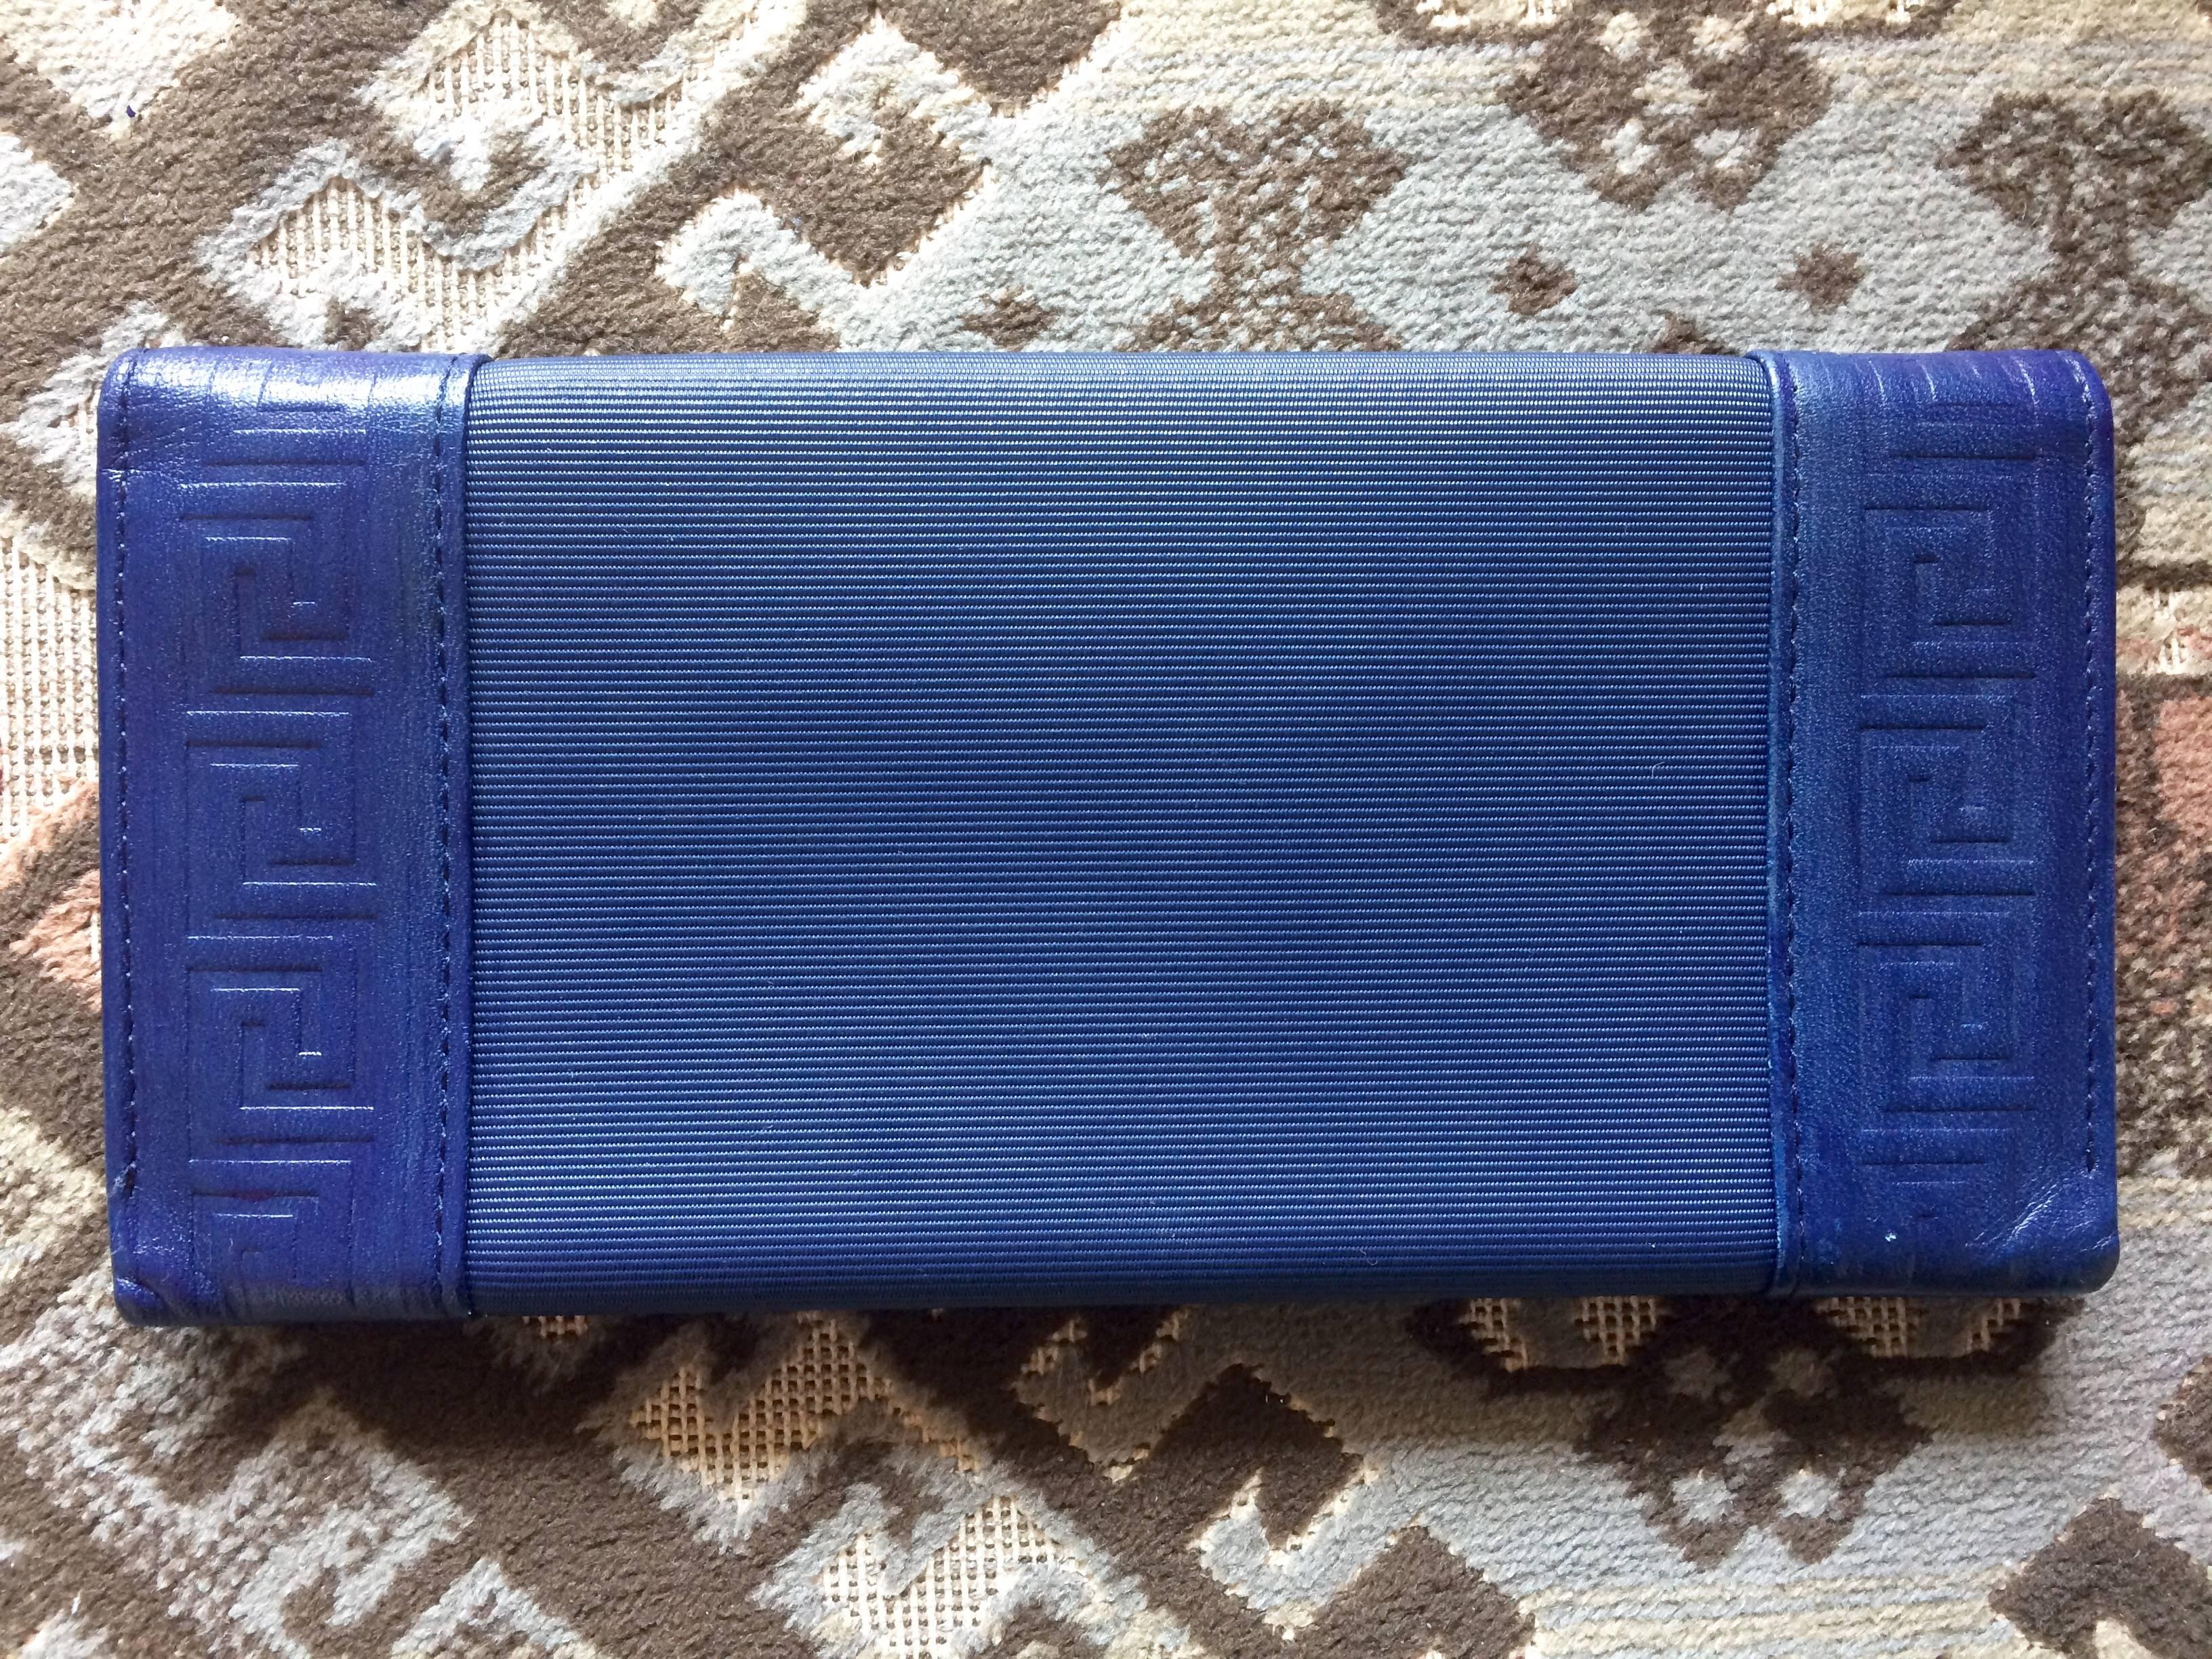 Women's or Men's Vintage Gianni Versace blue wallet with geometric pattern and logo round motif.